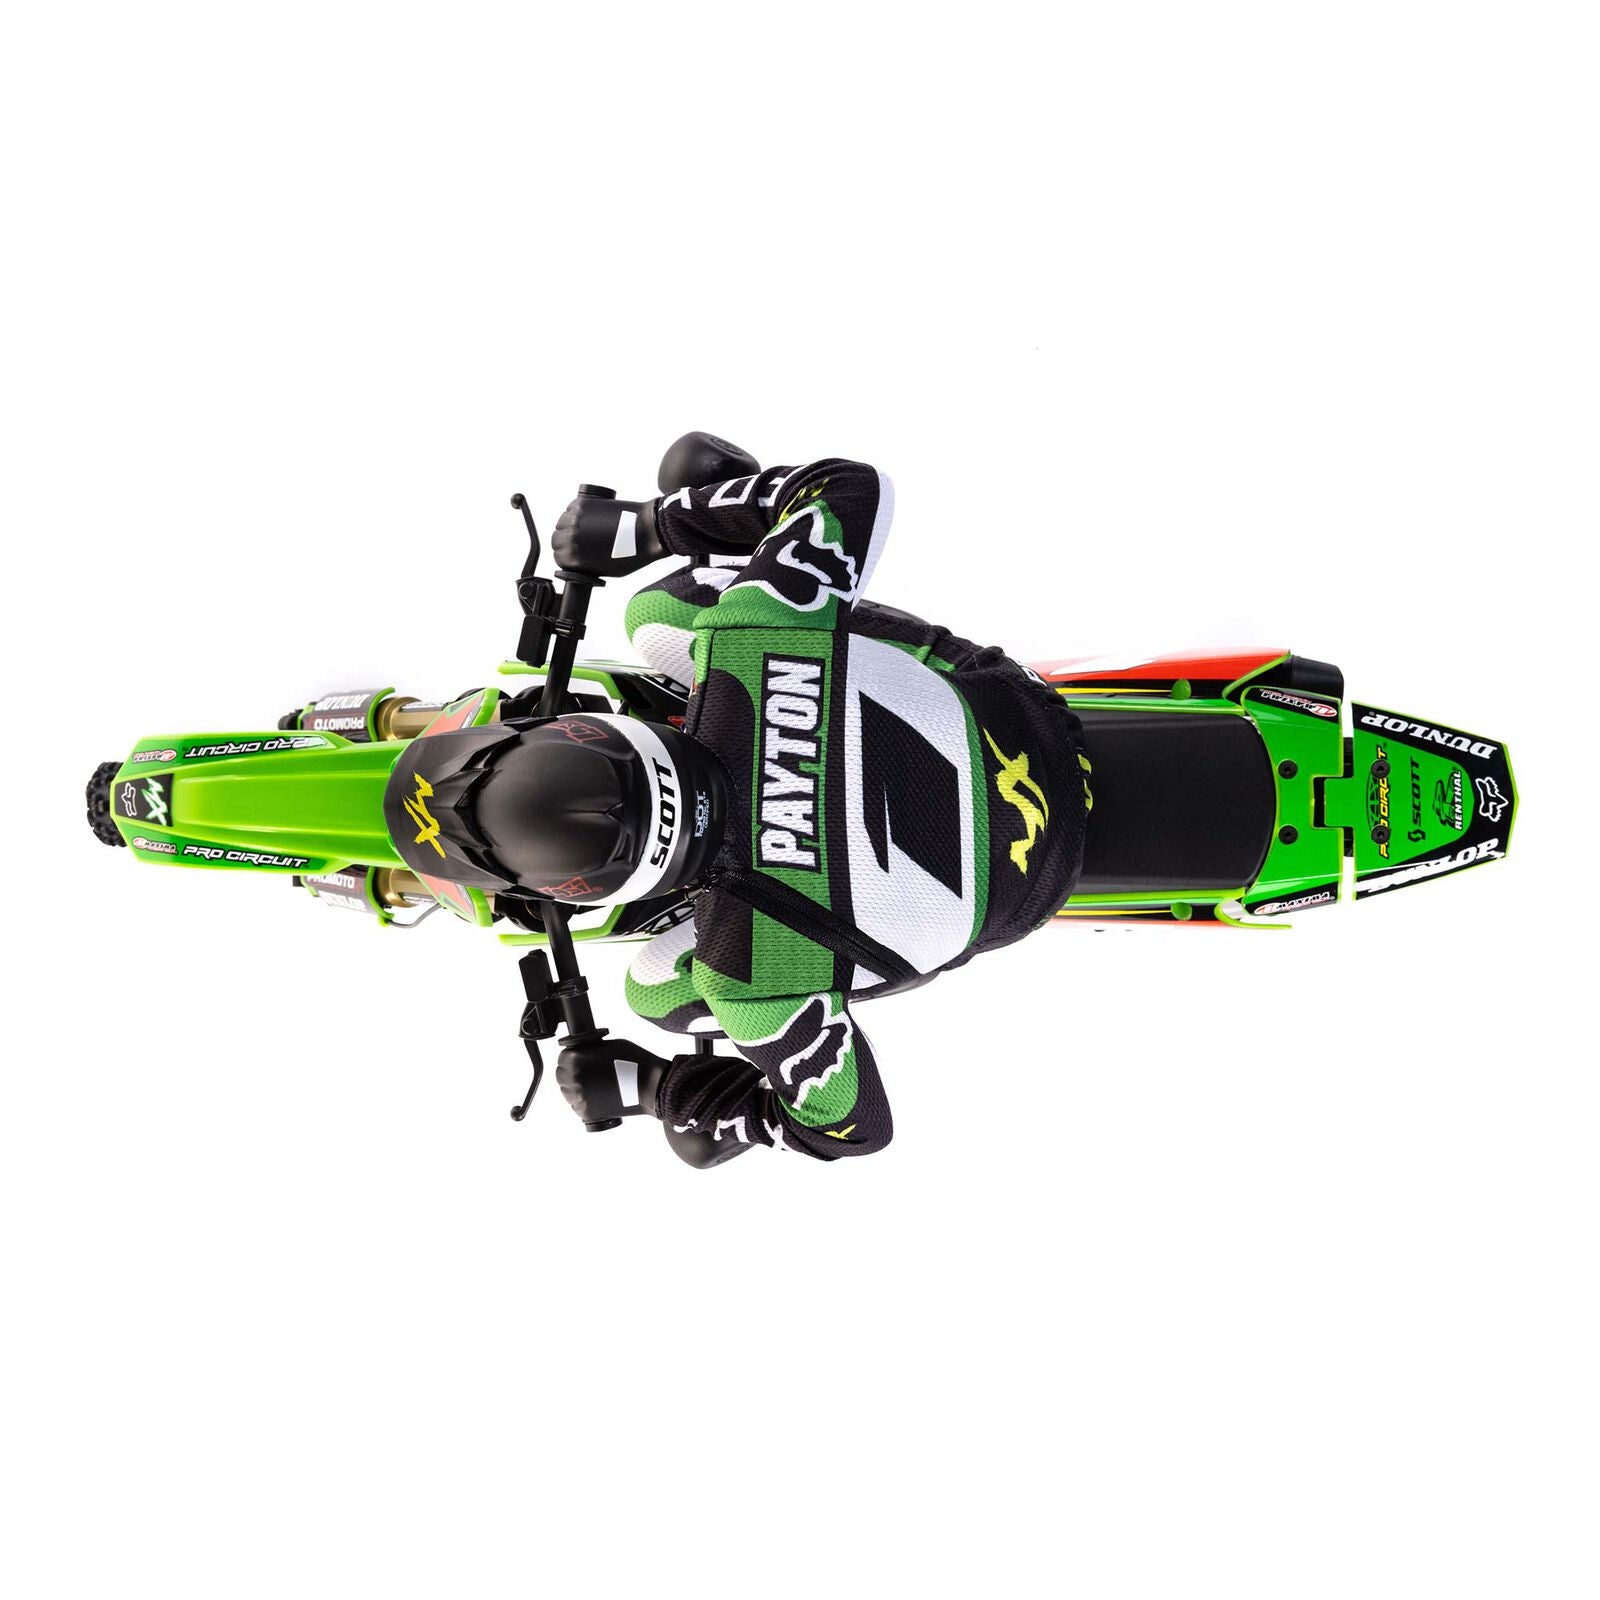 Losi Promoto-MX RTR 1/4 Brushless Dirt Bike (Pro-Circuit) w/2.4GHz DX3PM Radio, MS6X & Battery & Charger